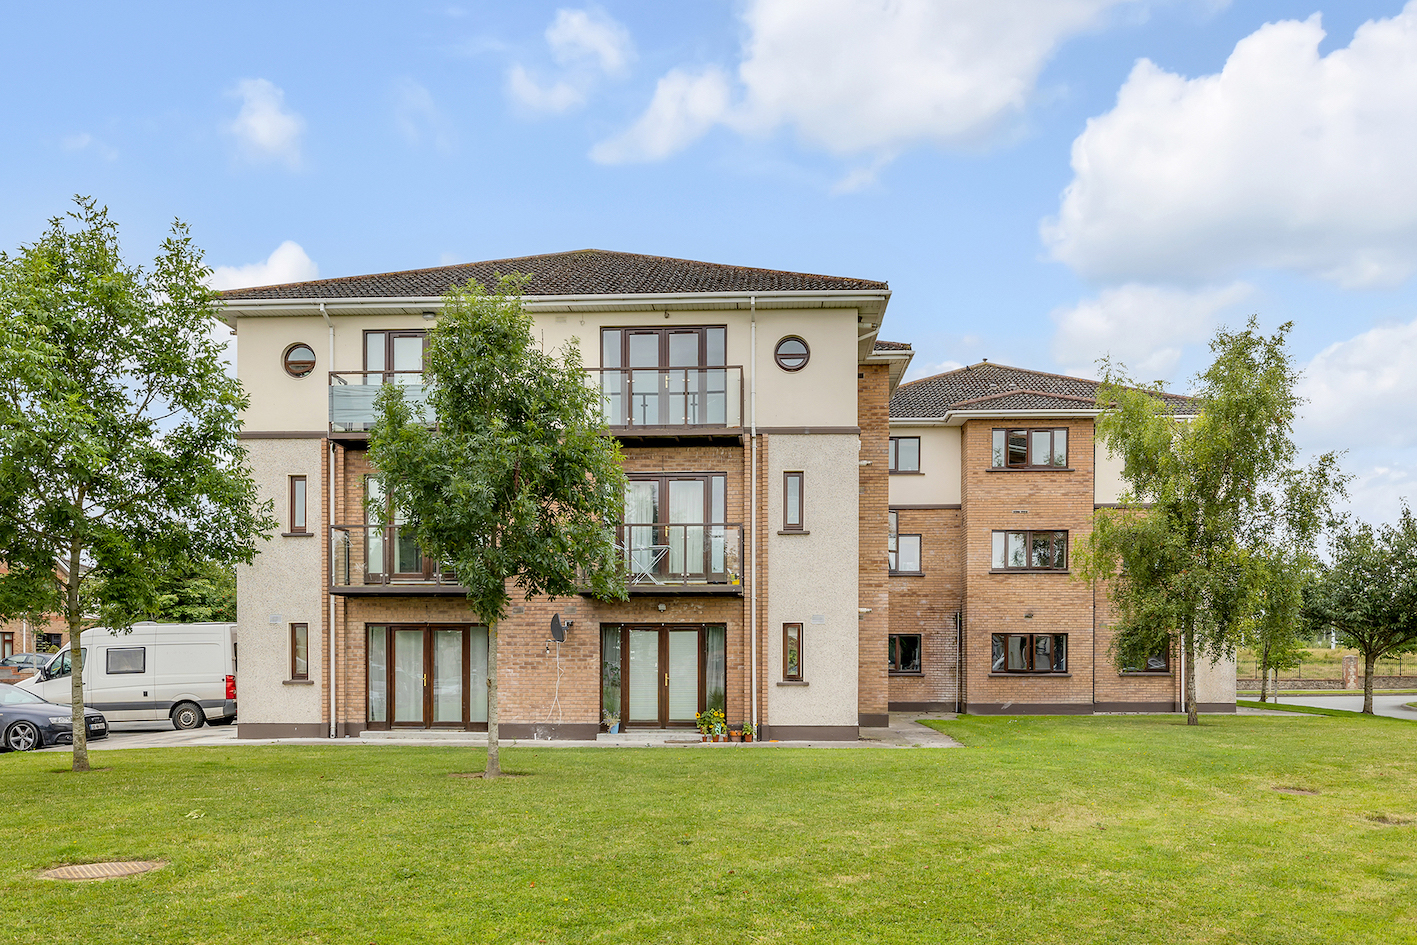 Apartment 34, Block 2, The Crescent, Moyglare Hall, Maynooth, Co. Kildare